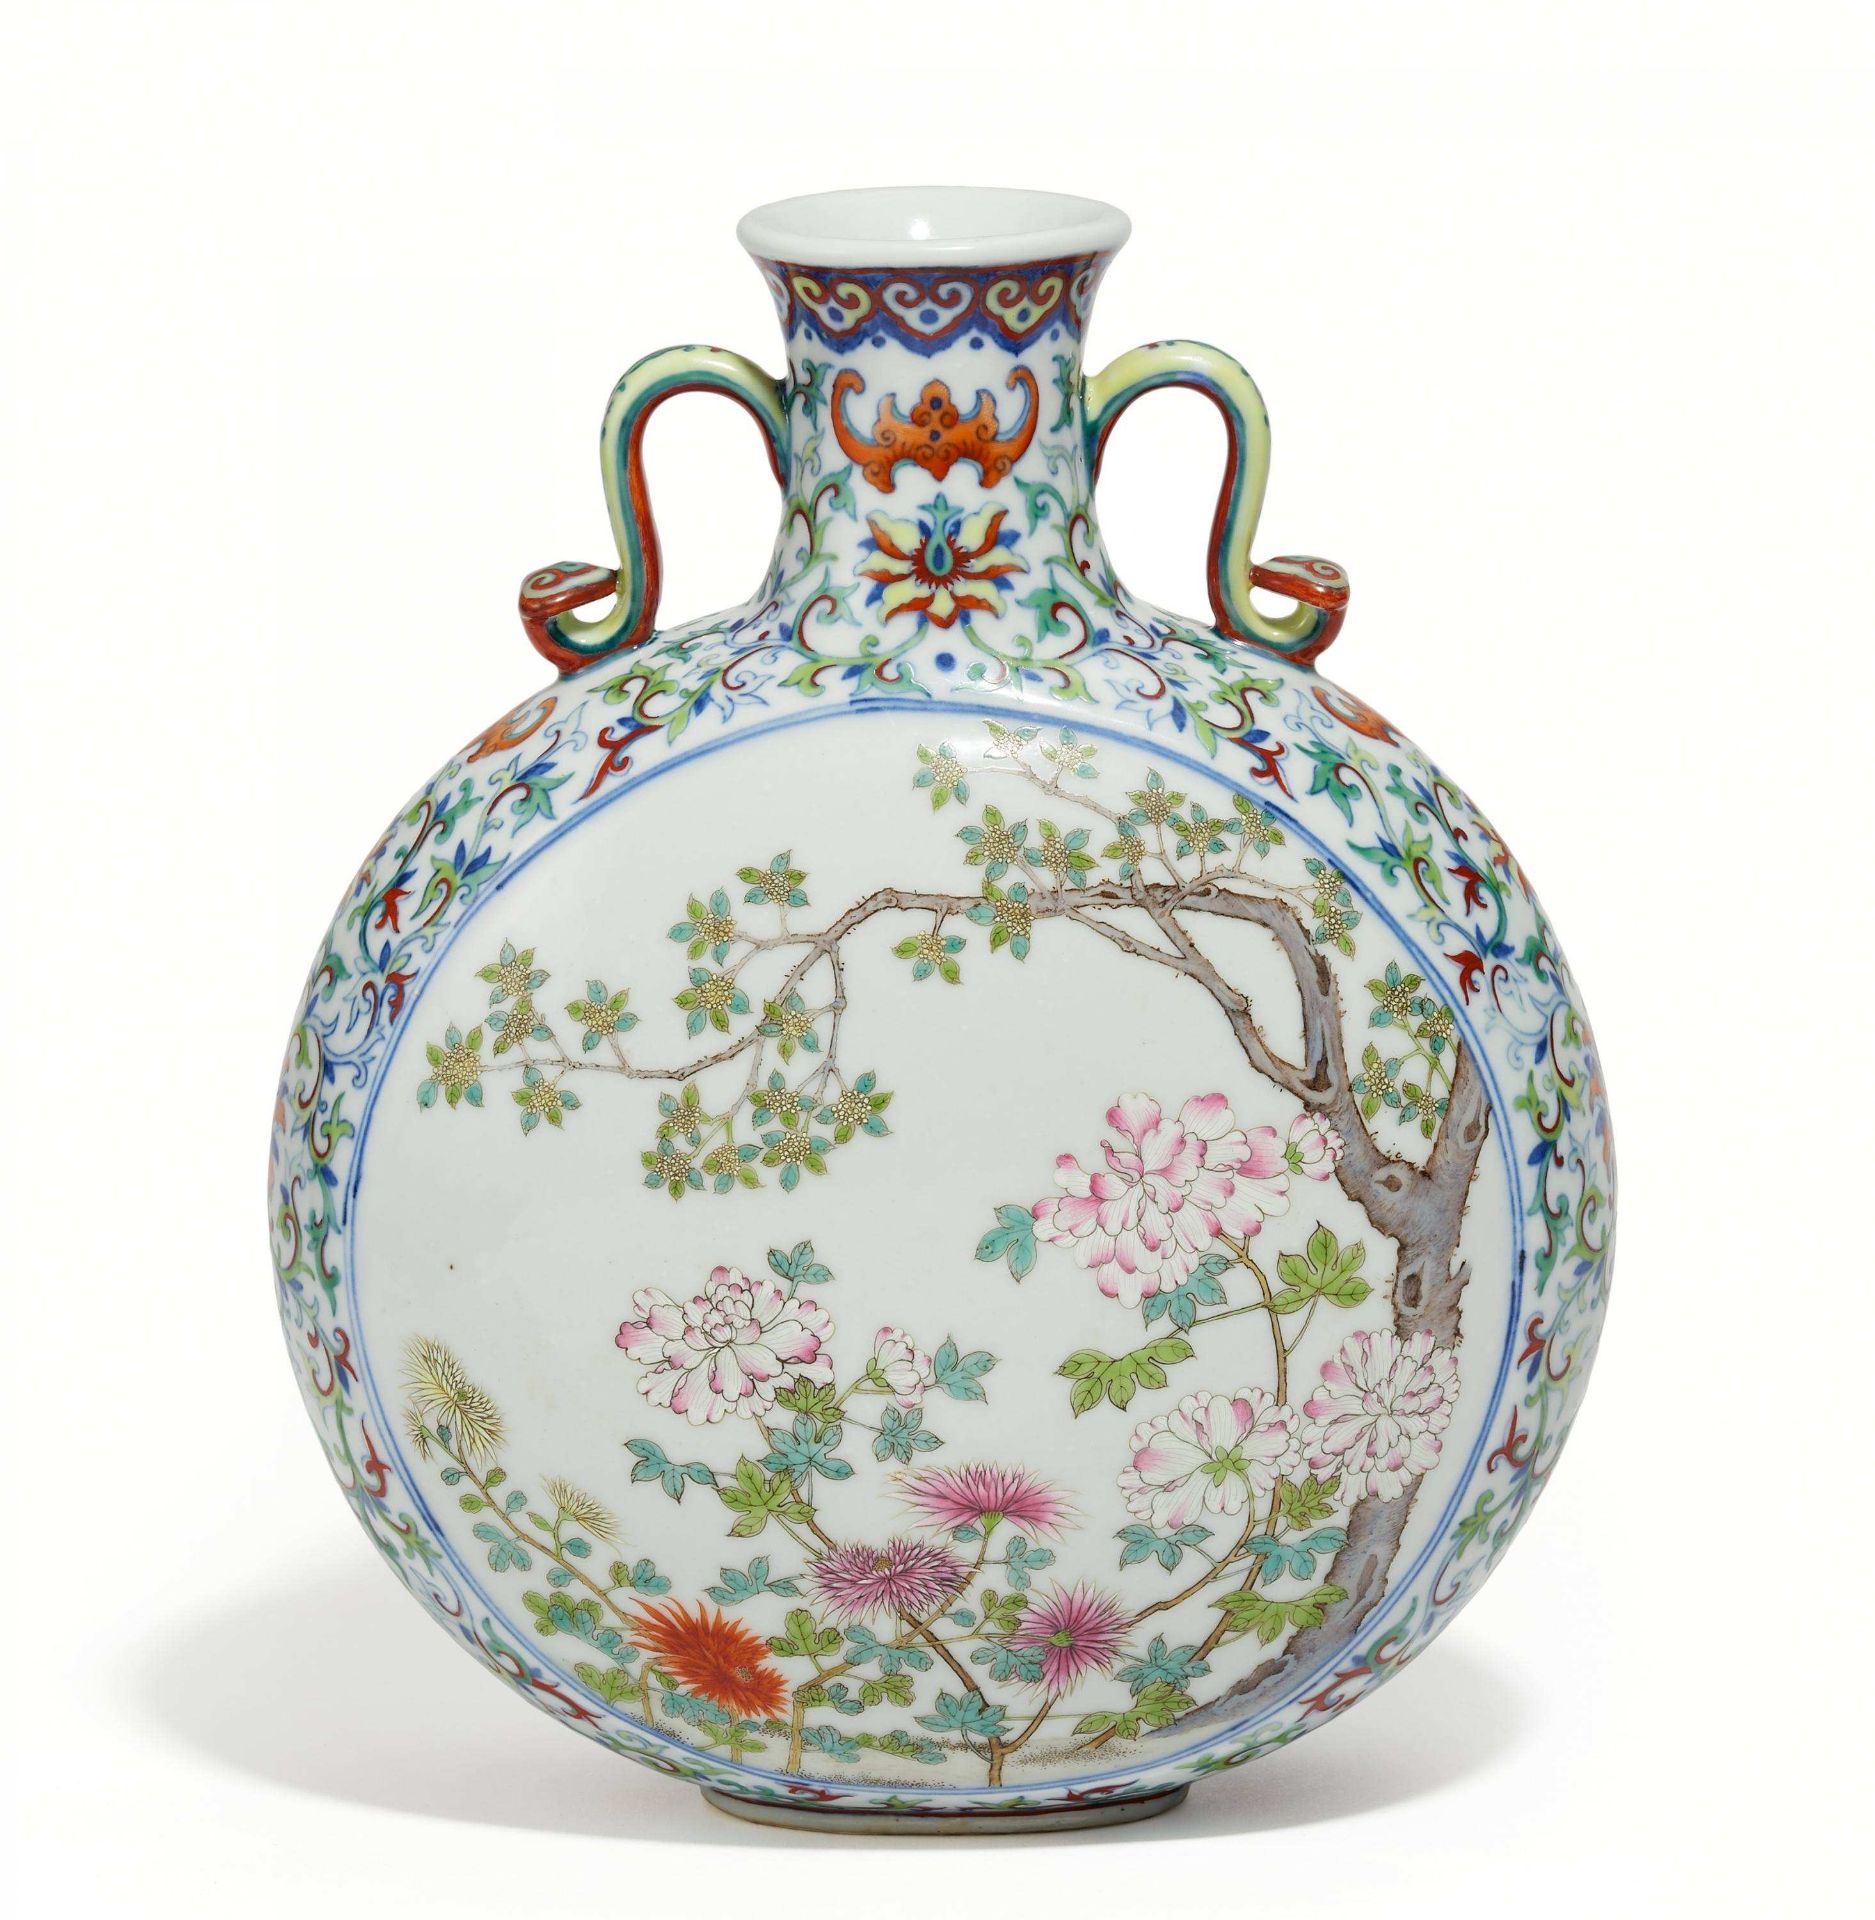 MOONFLASK WITH RUYI SHAPED HANDLES. China. 20th c. or later. Porcelain, painted in underglaze blue